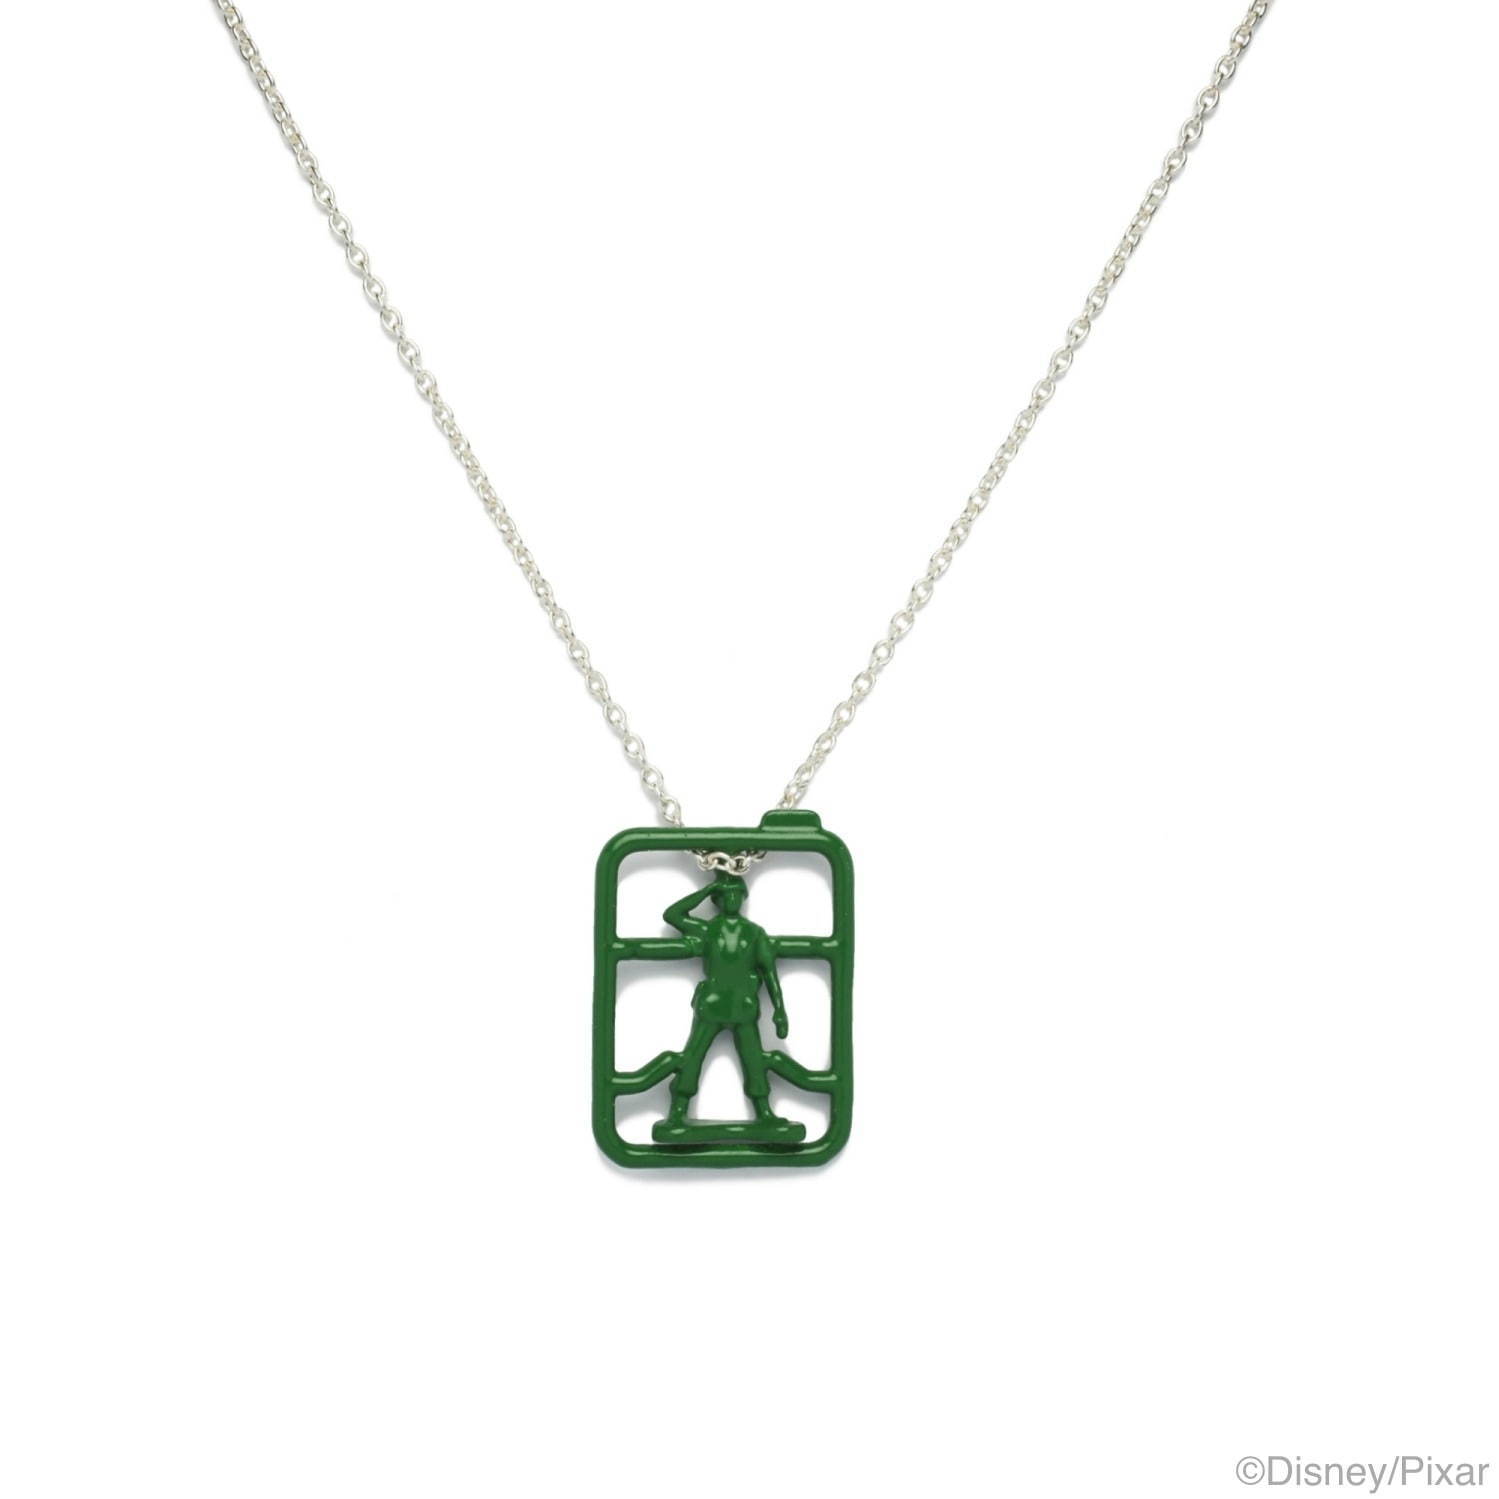 GREEN ARMY MEN NECKLACE 15,000円＋税